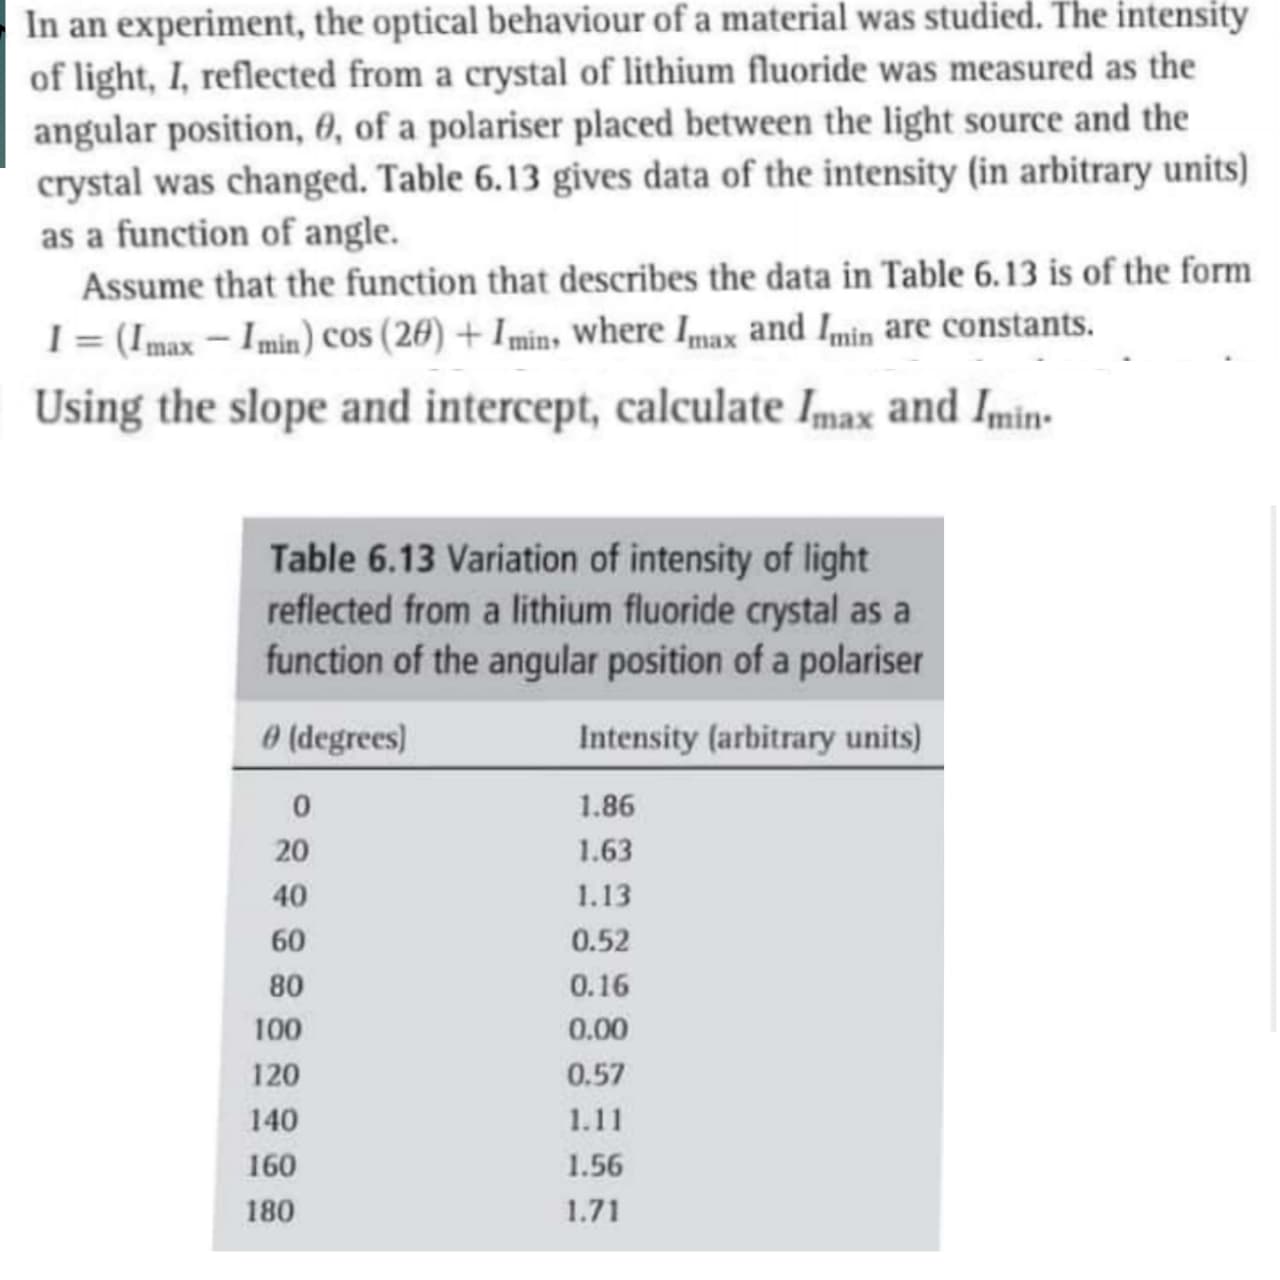 In an experiment, the optical behaviour of a material was studied. The intensity
of light, I, reflected from a crystal of lithium fluoride was measured as the
angular position, 0, of a polariser placed between the light source and the
crystal was changed. Table 6.13 gives data of the intensity (in arbitrary units)]
as a function of angle.
Assume that the function that describes the data in Table 6.13 is of the form
I = (Imax – Imin) cos (26) + Imin» where Imax and Imin are constants.
%3D
Using the slope and intercept, calculate Imax and Imin-
